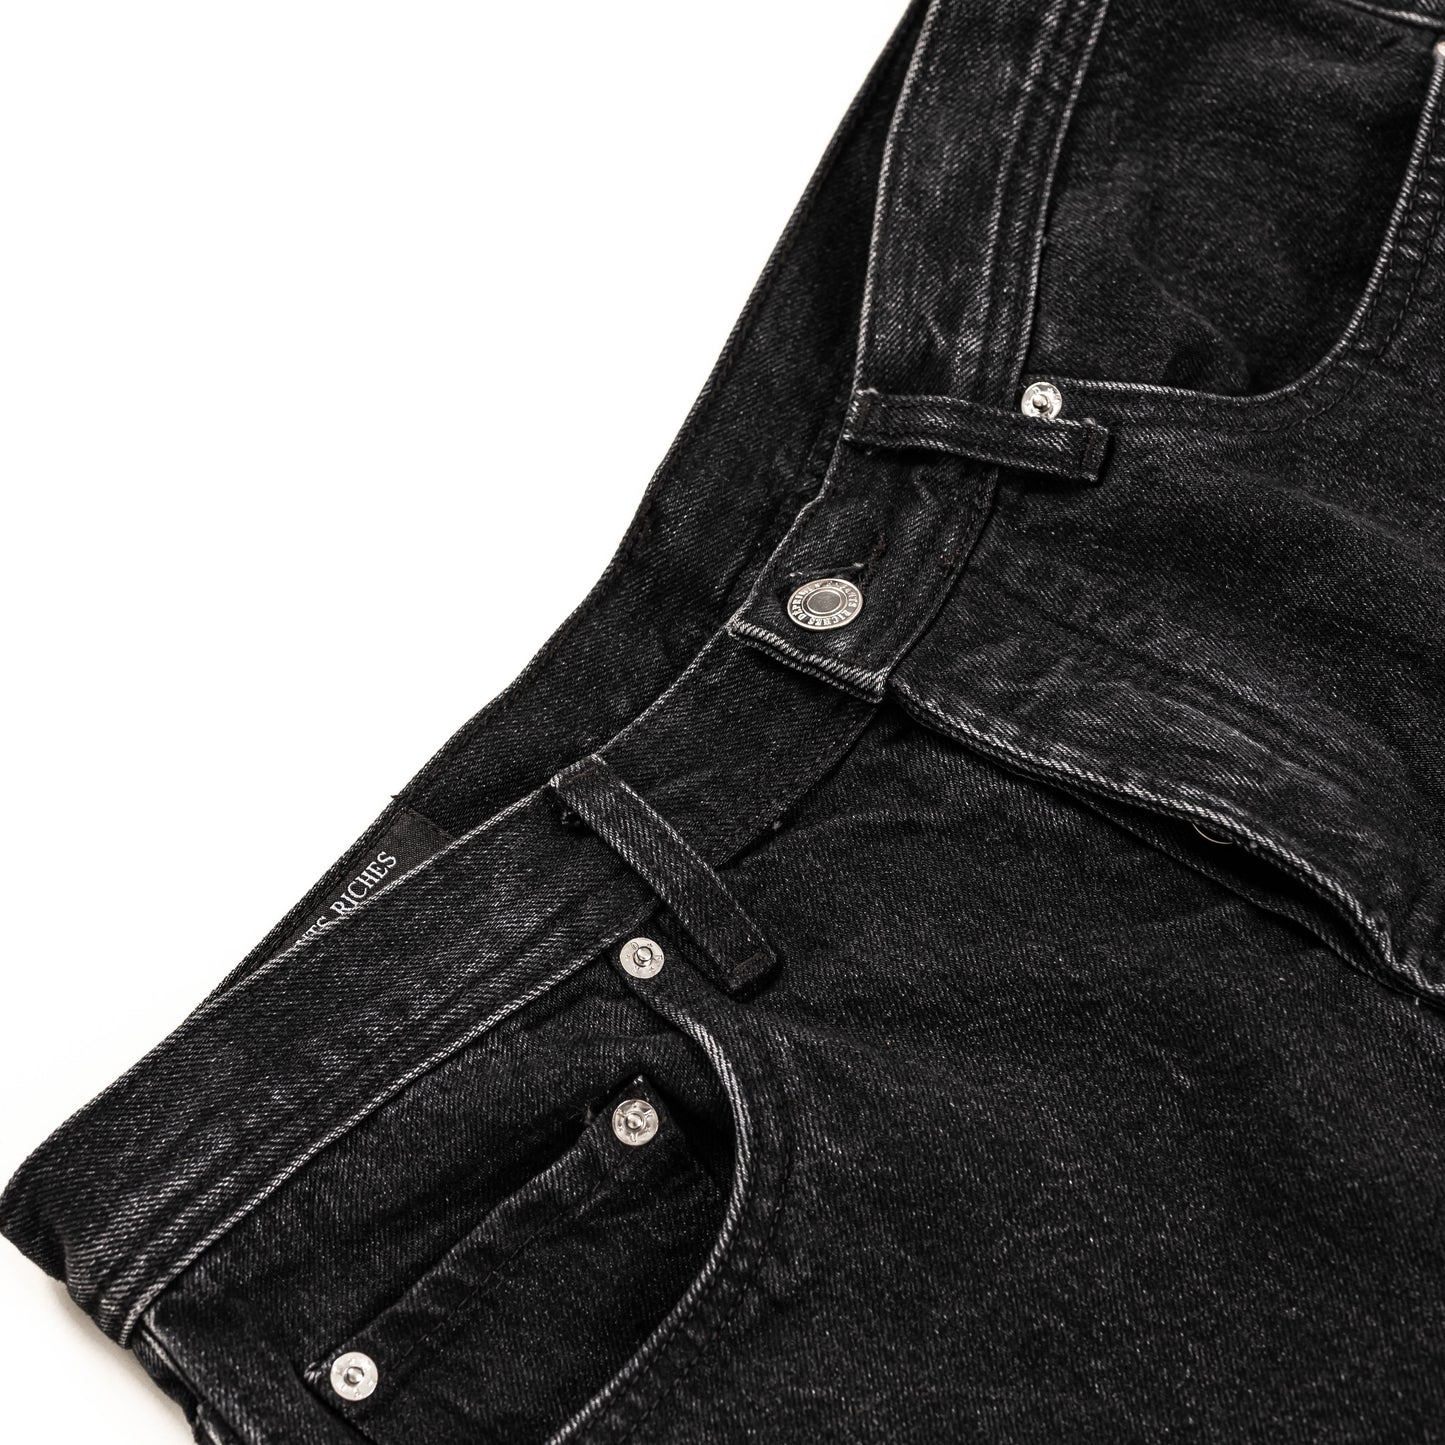 Flannel Lined Baggy Jean, Washed Black